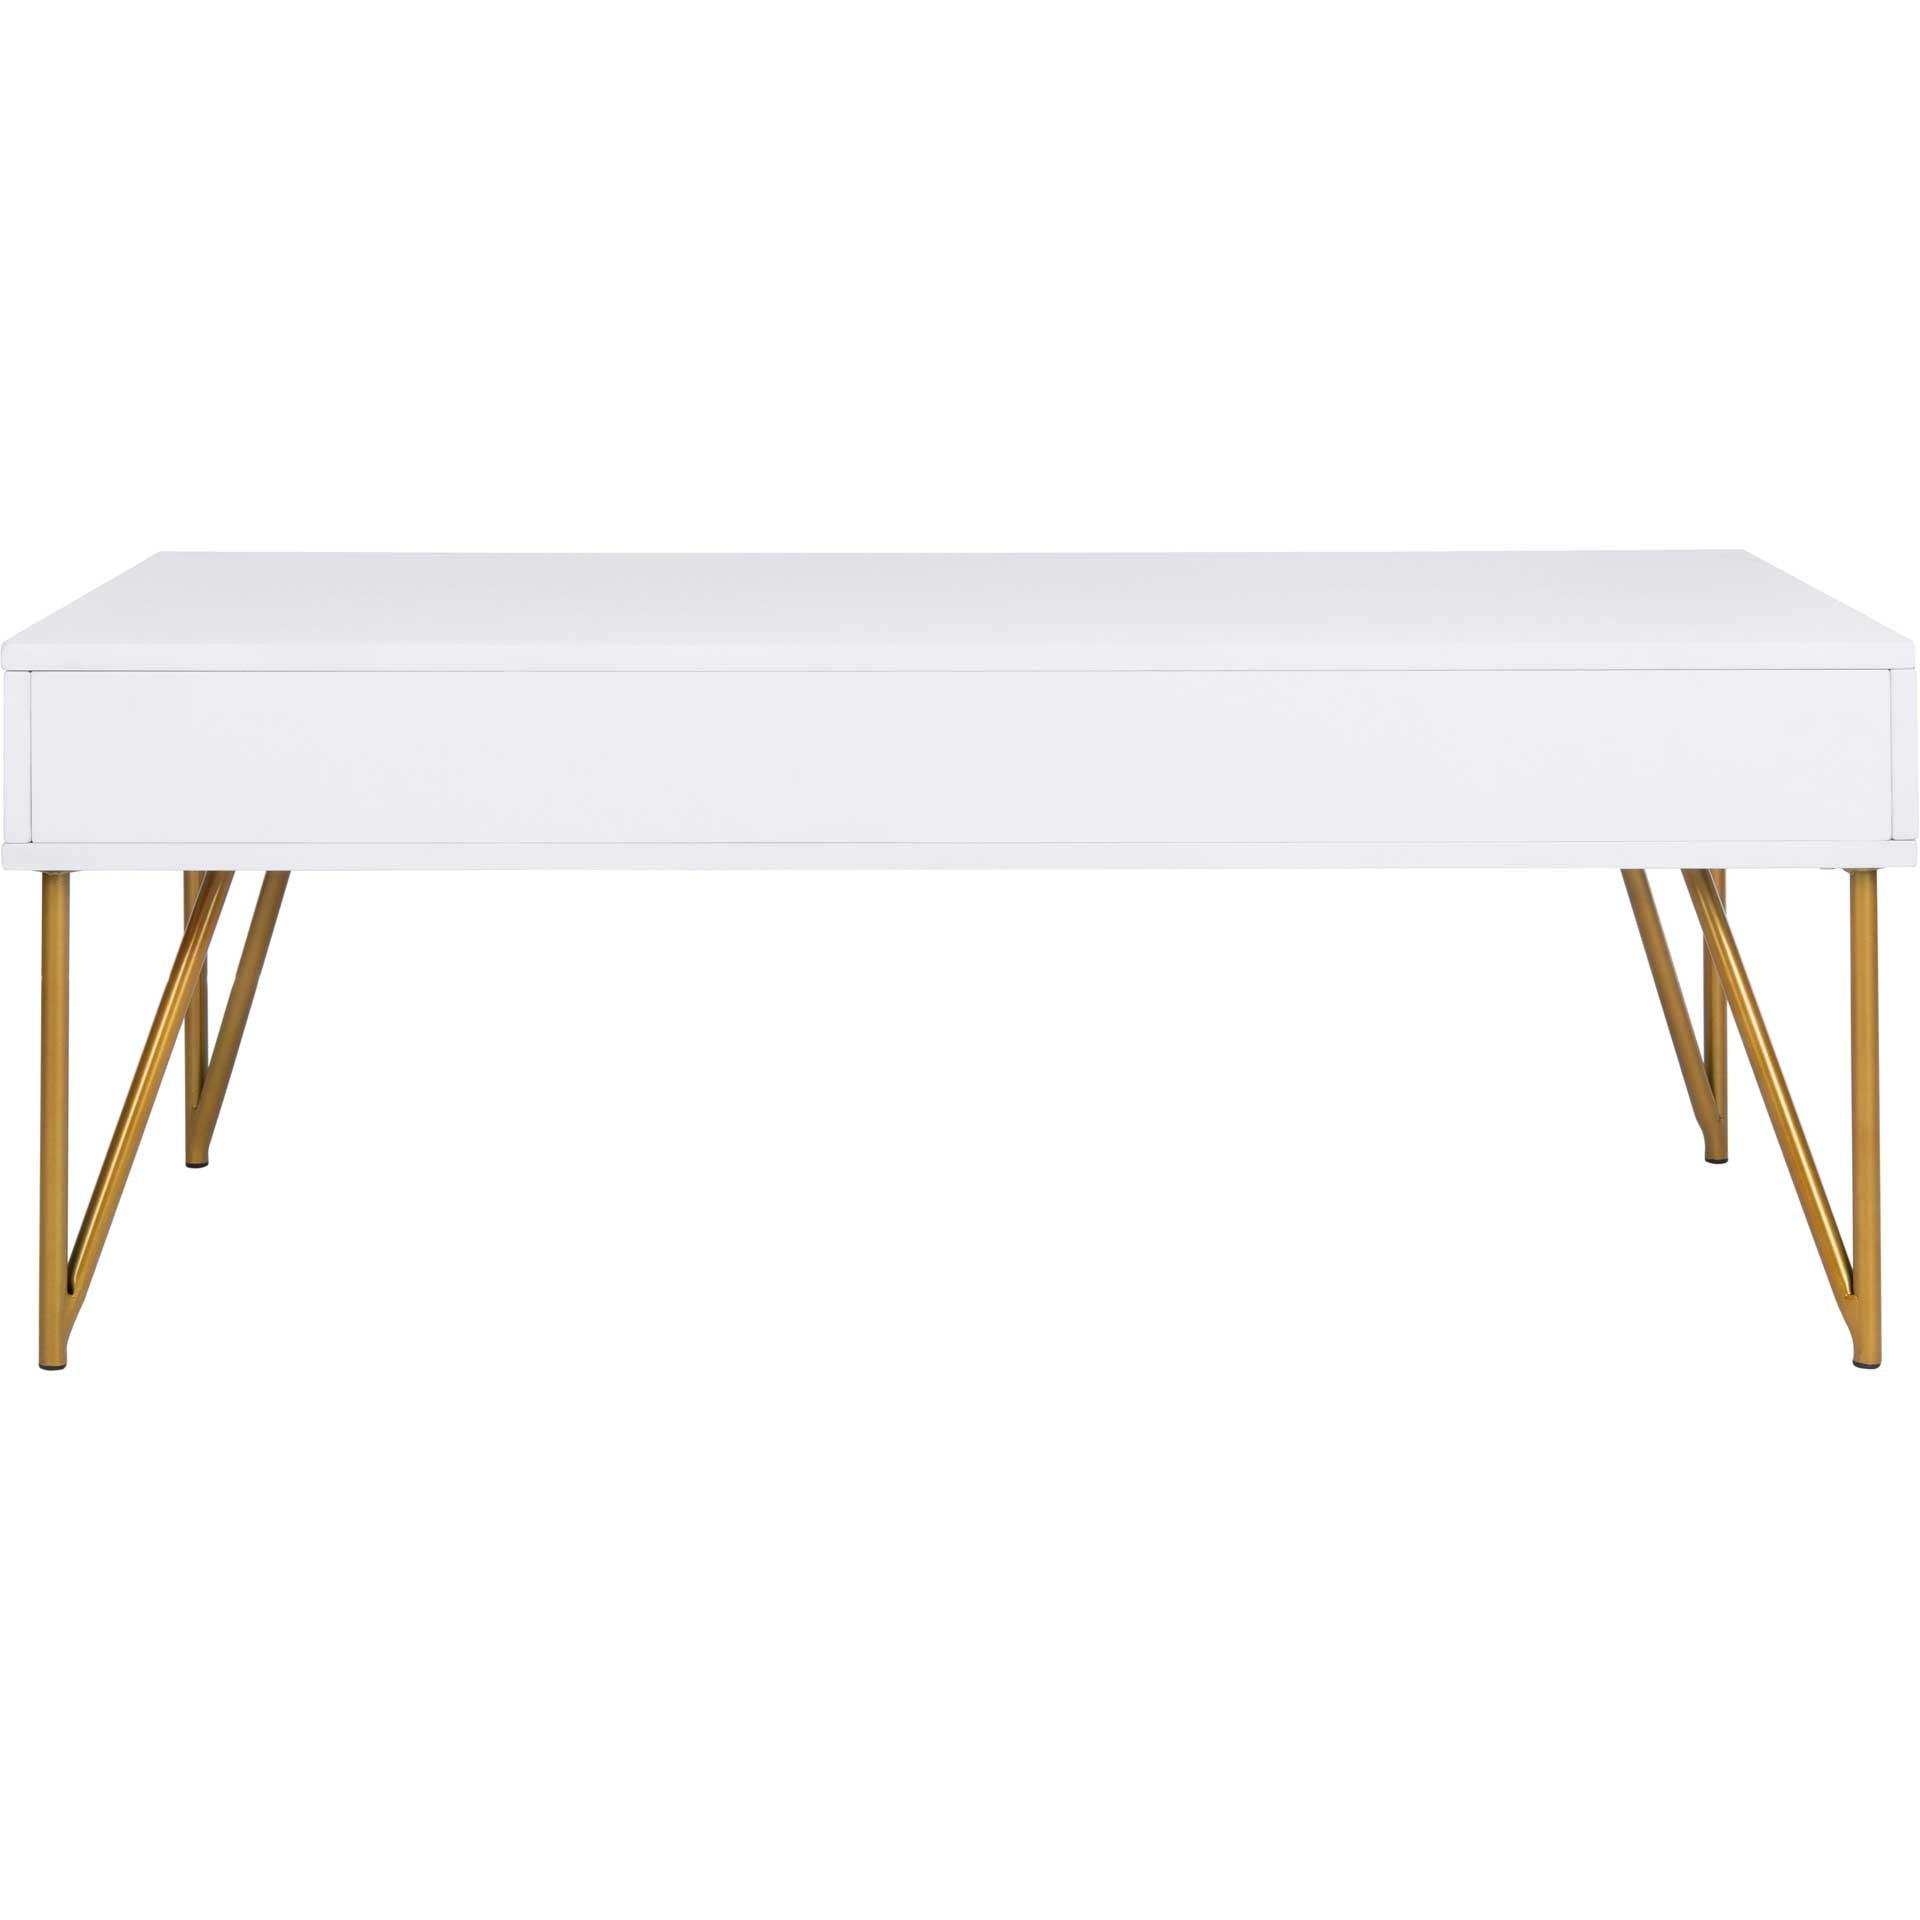 Pierce Two Drawer Coffee Table White/Gold